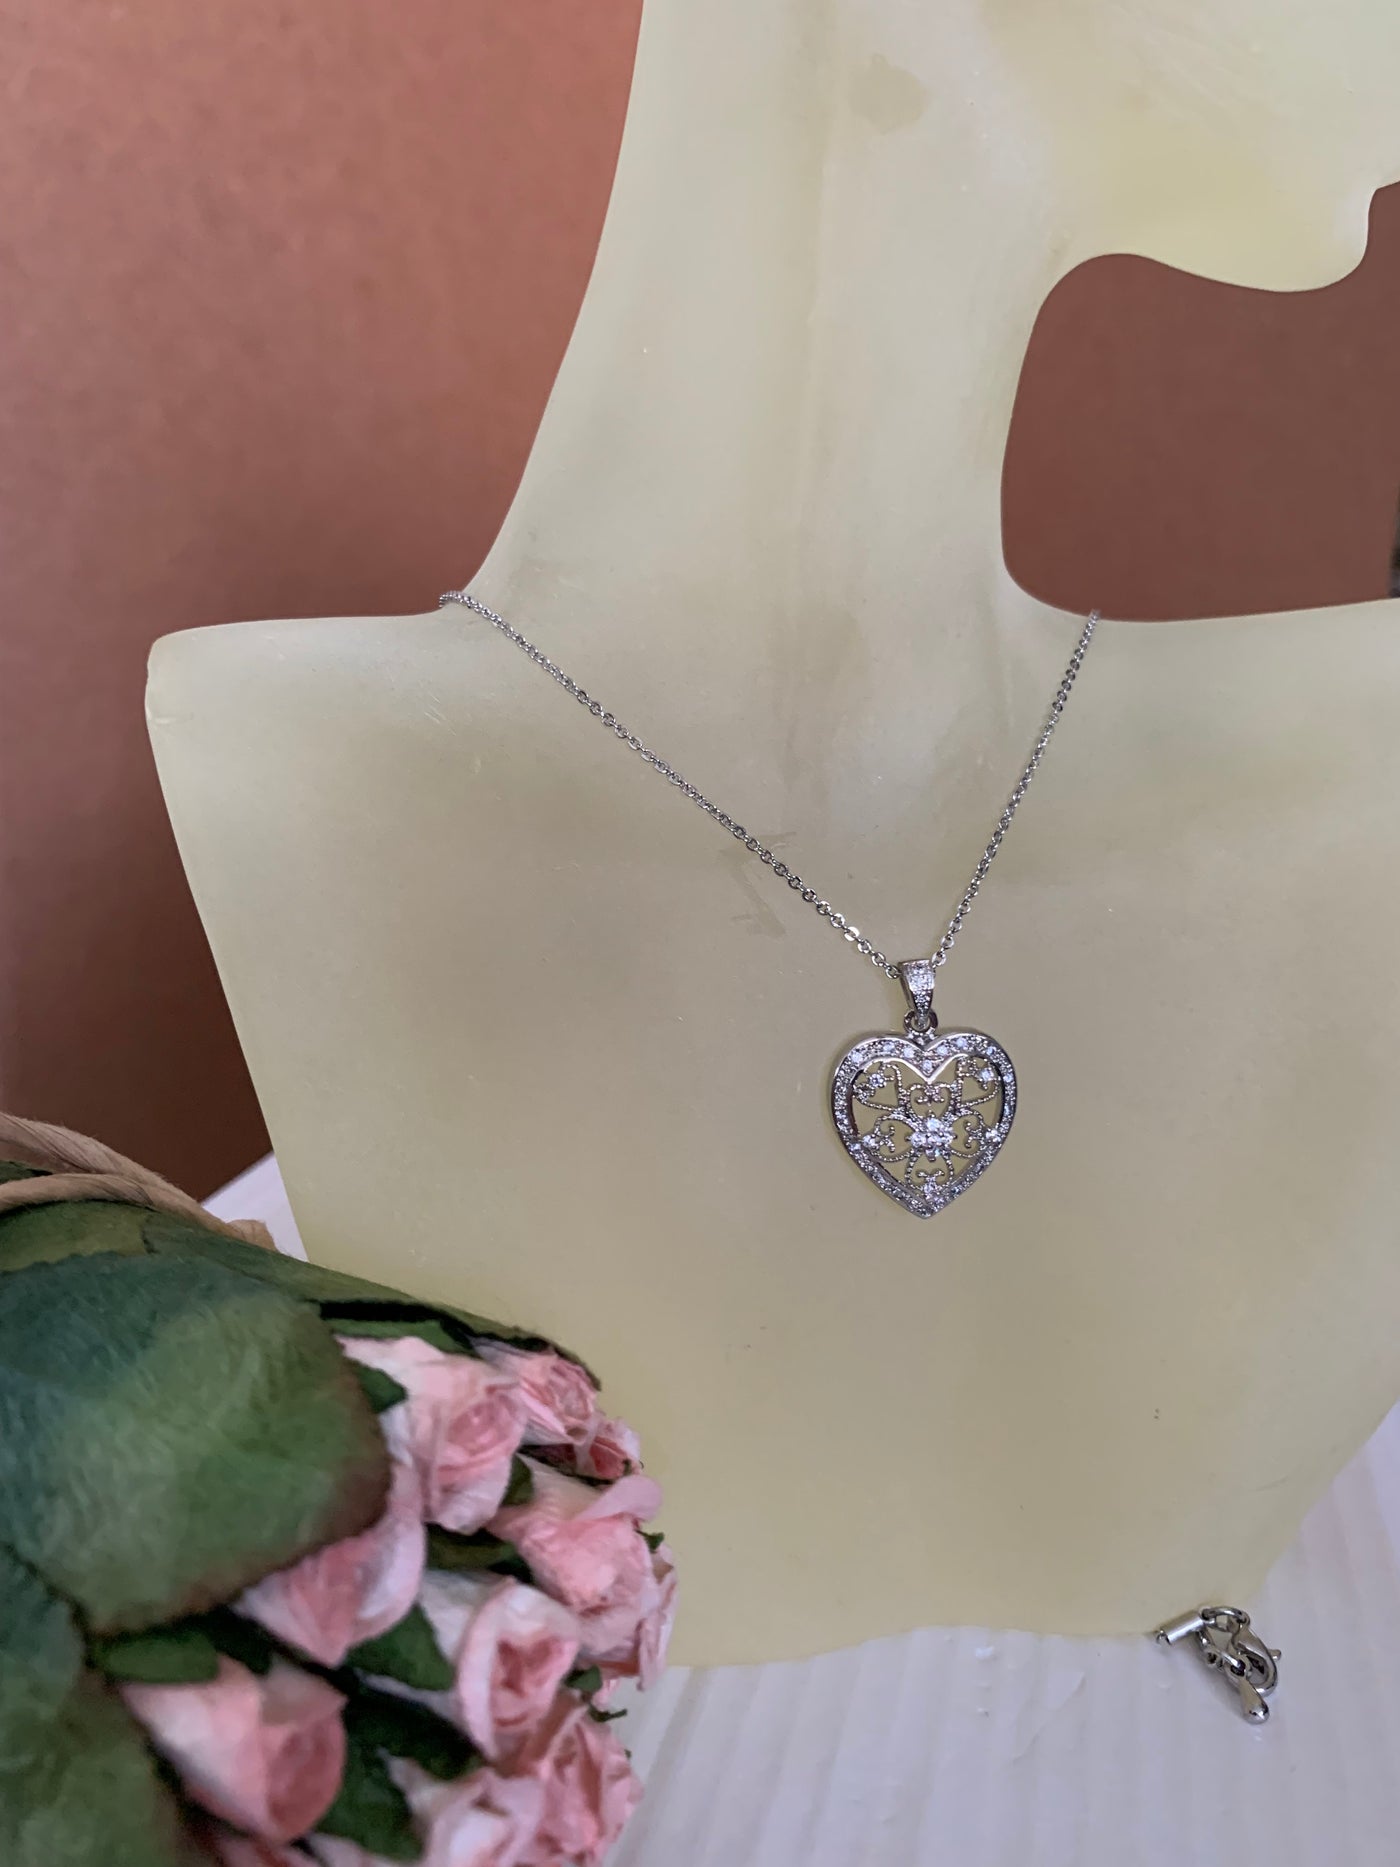 Pave Set Cubic Zirconia Filigree Heart Pendant Necklace in Silver Tone